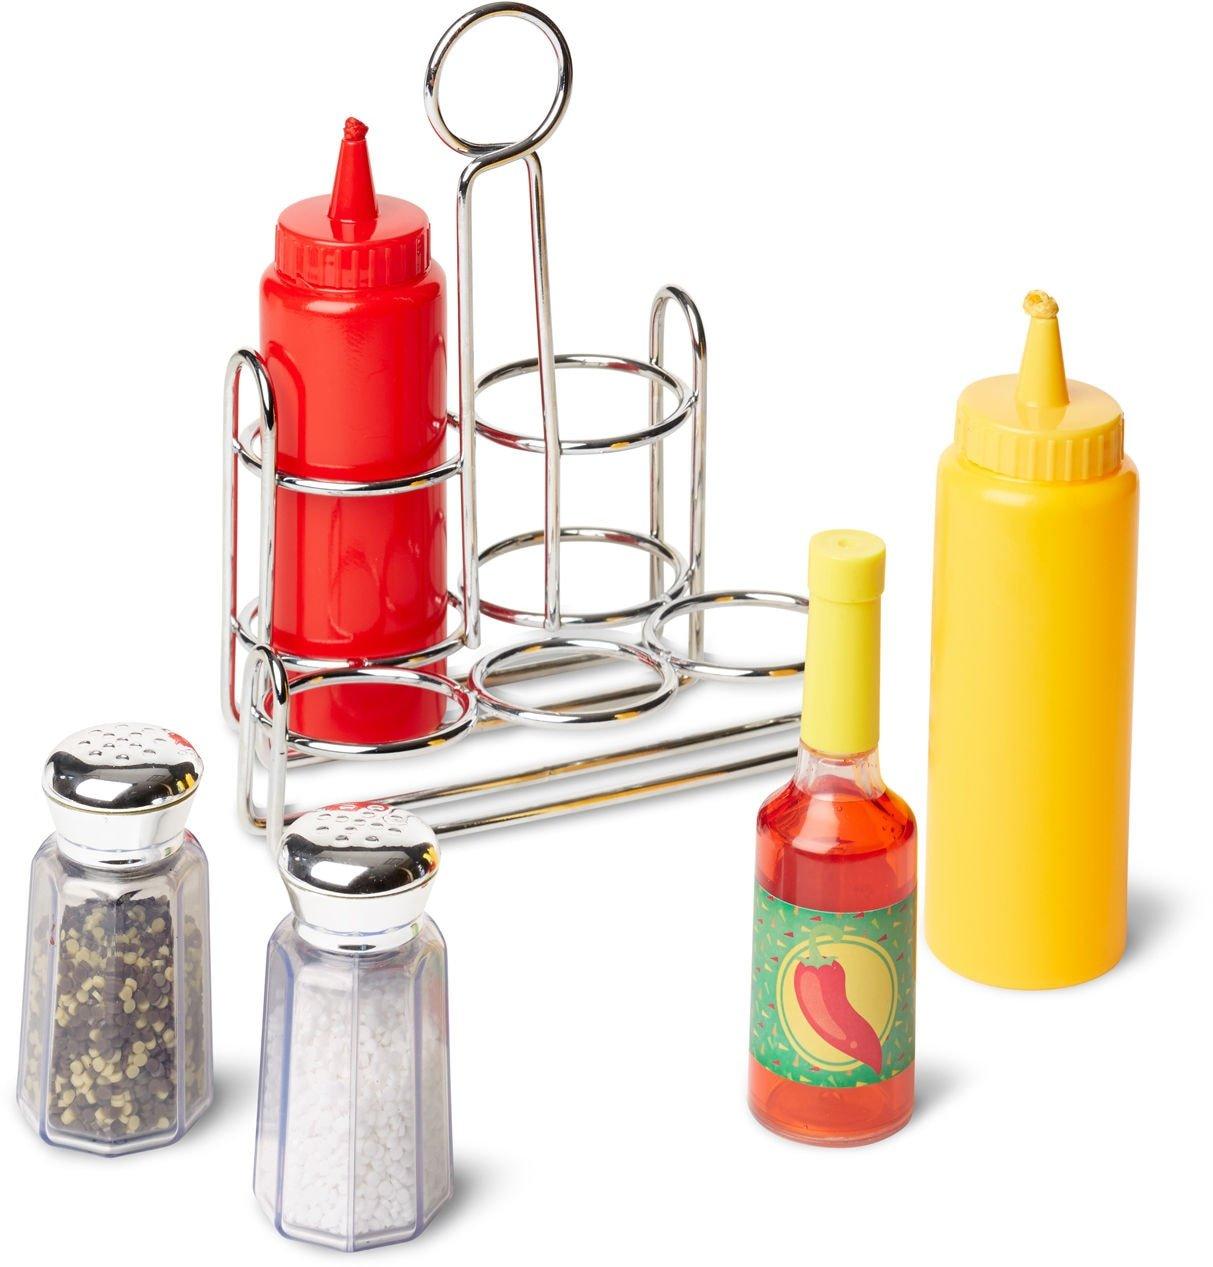 Let's Play House Condiments Set